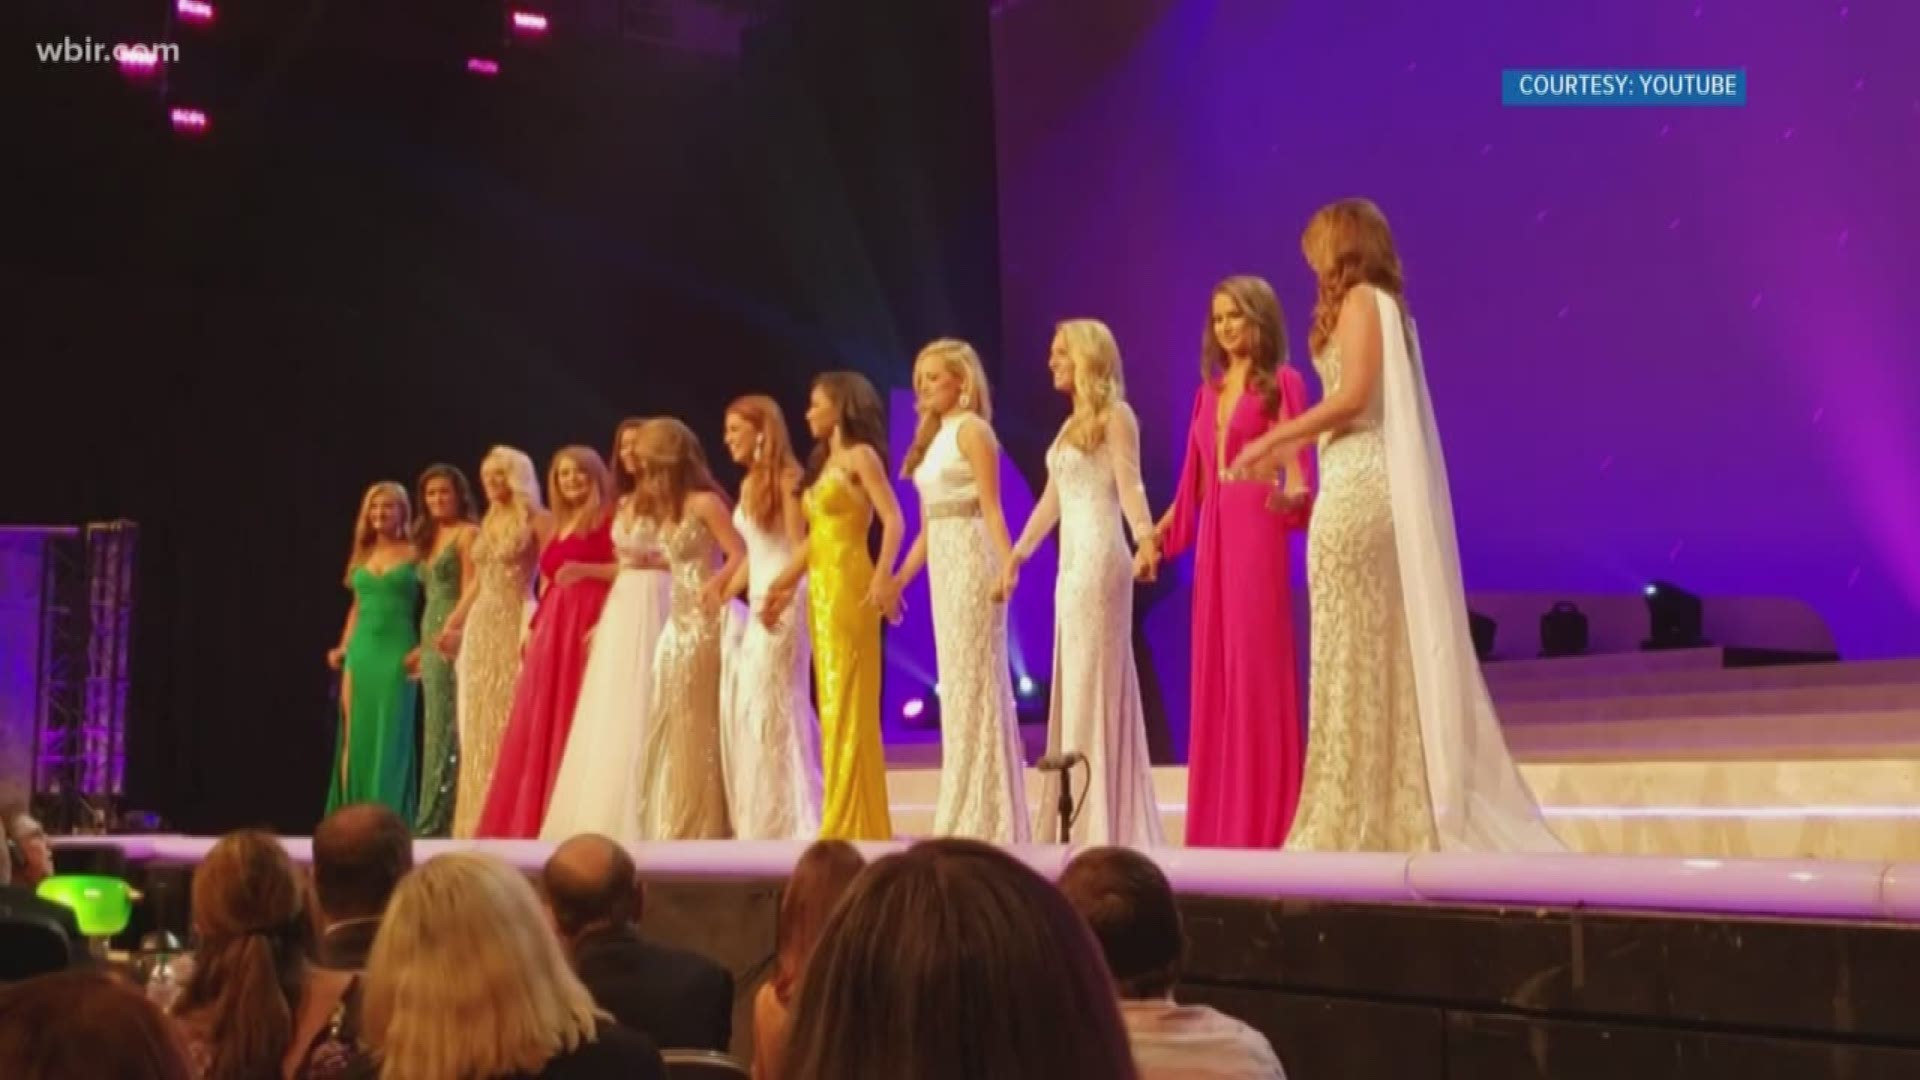 27 women are competing for the title of Miss Tennessee this weekend here in Knoxville. That's fewer contestants than usual after a change in leadership resulted in two Miss Tennessee pageants this year.